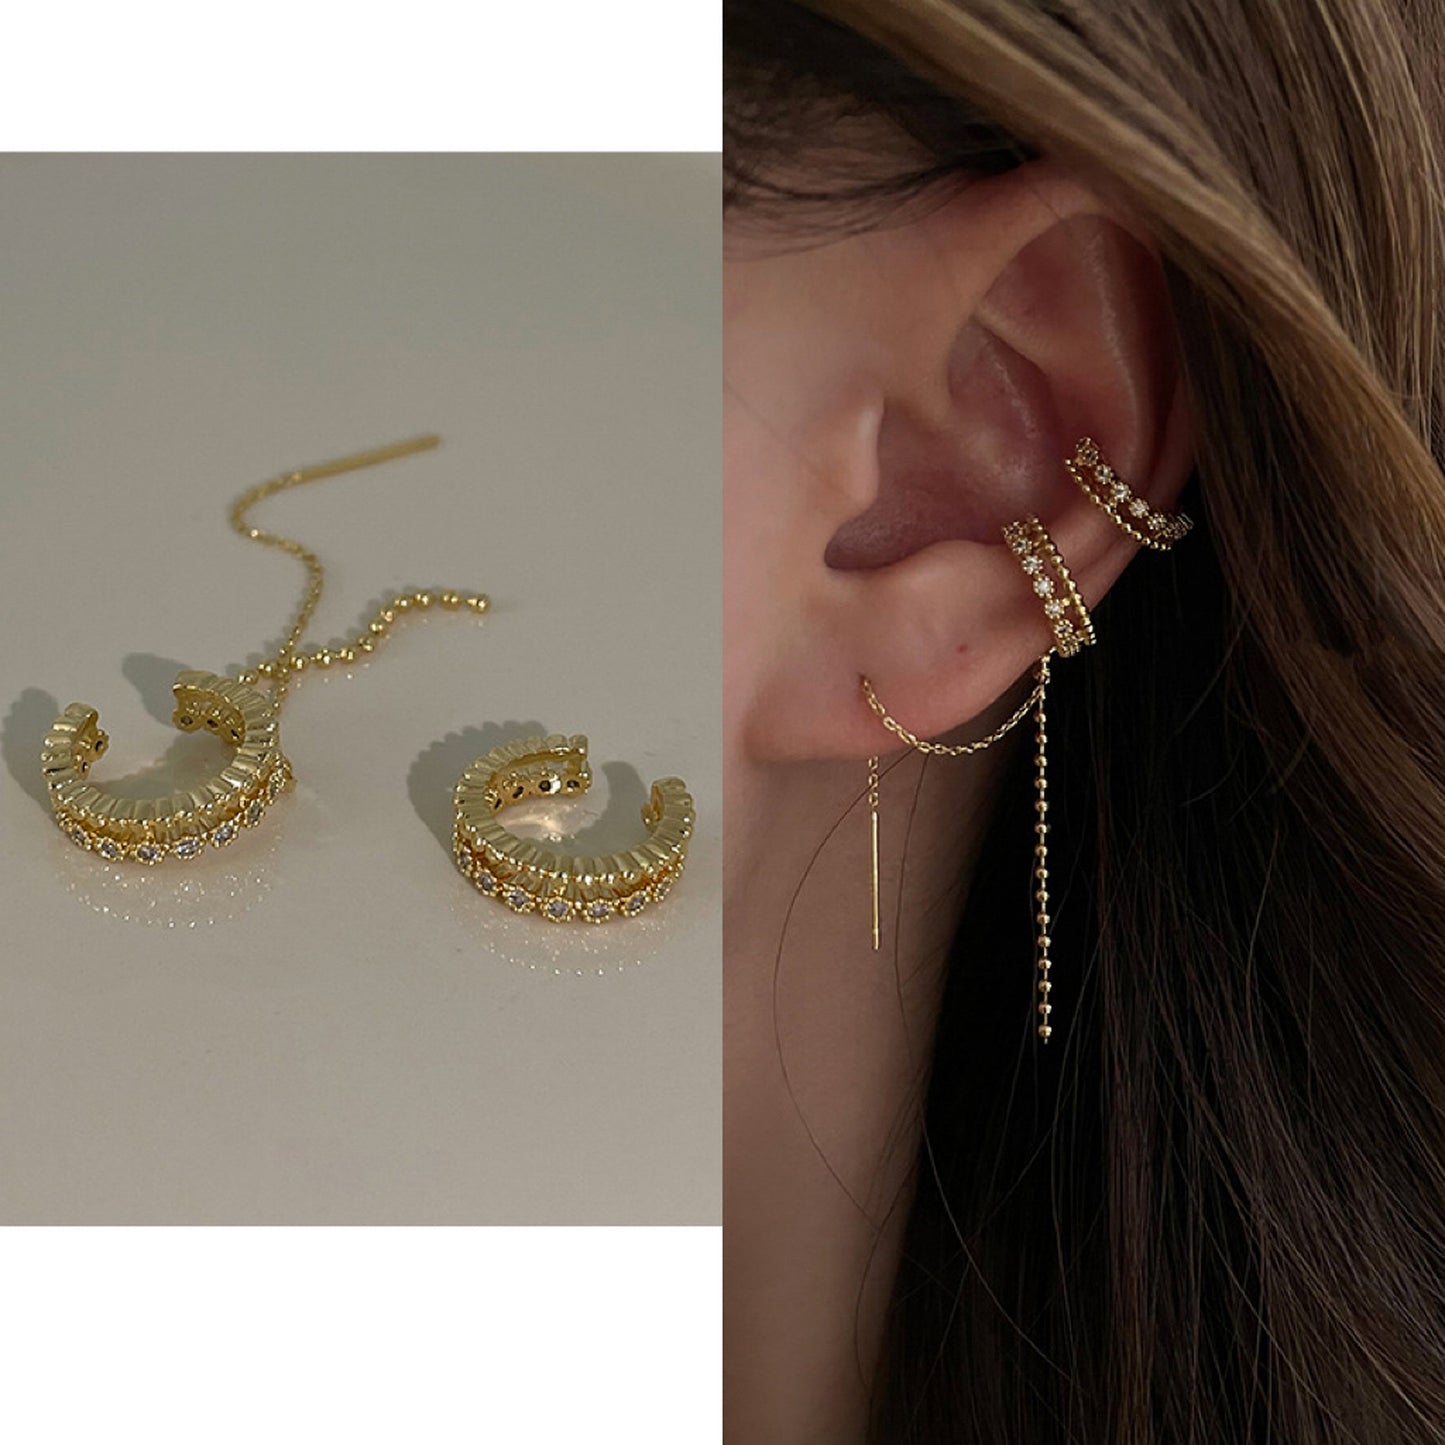 Double layer dangle ear cuff threaders, Gold lace cuff earrings, Gold ear climber threaders set, Delicate helix earrings, Everyday jewelry